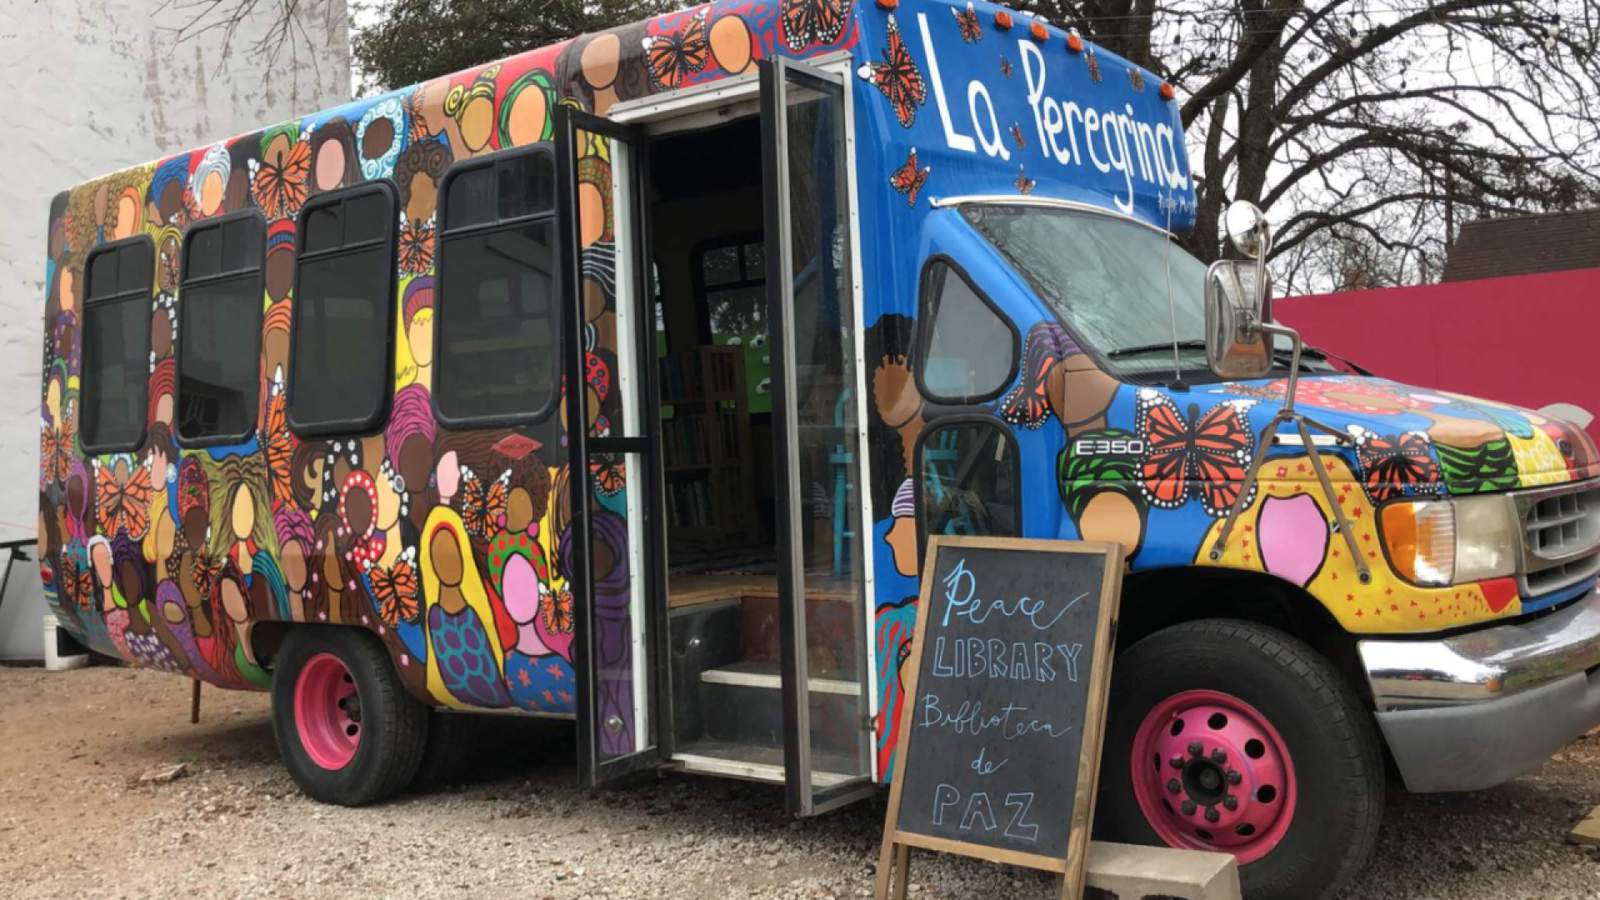 Southtown bus converted to library offers social justice collection